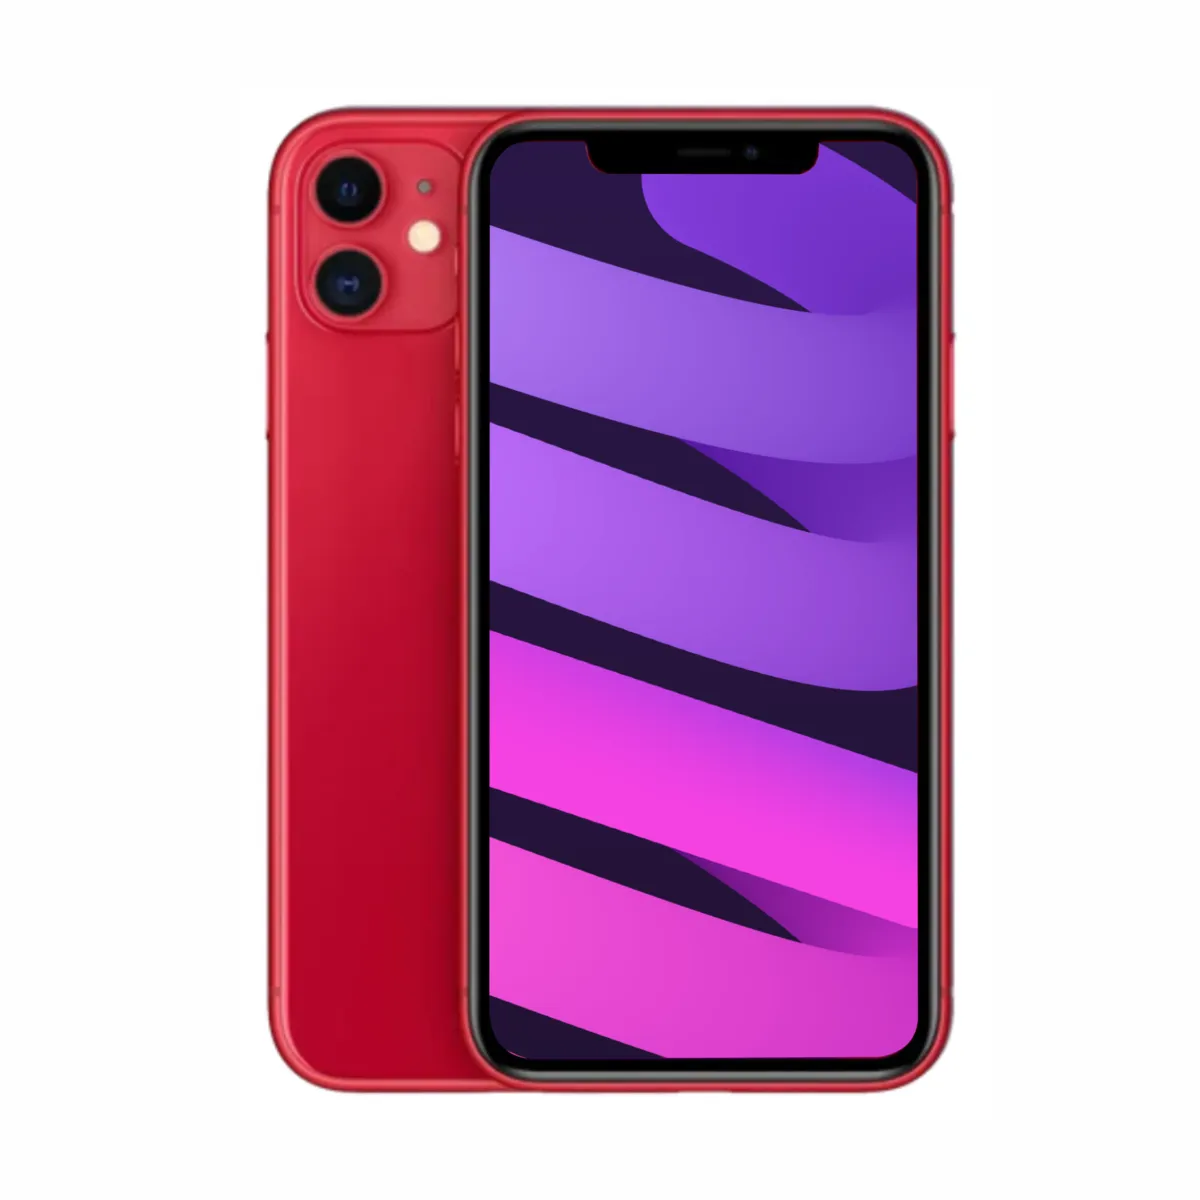 Like-New iPhone 11, 128gb, Red